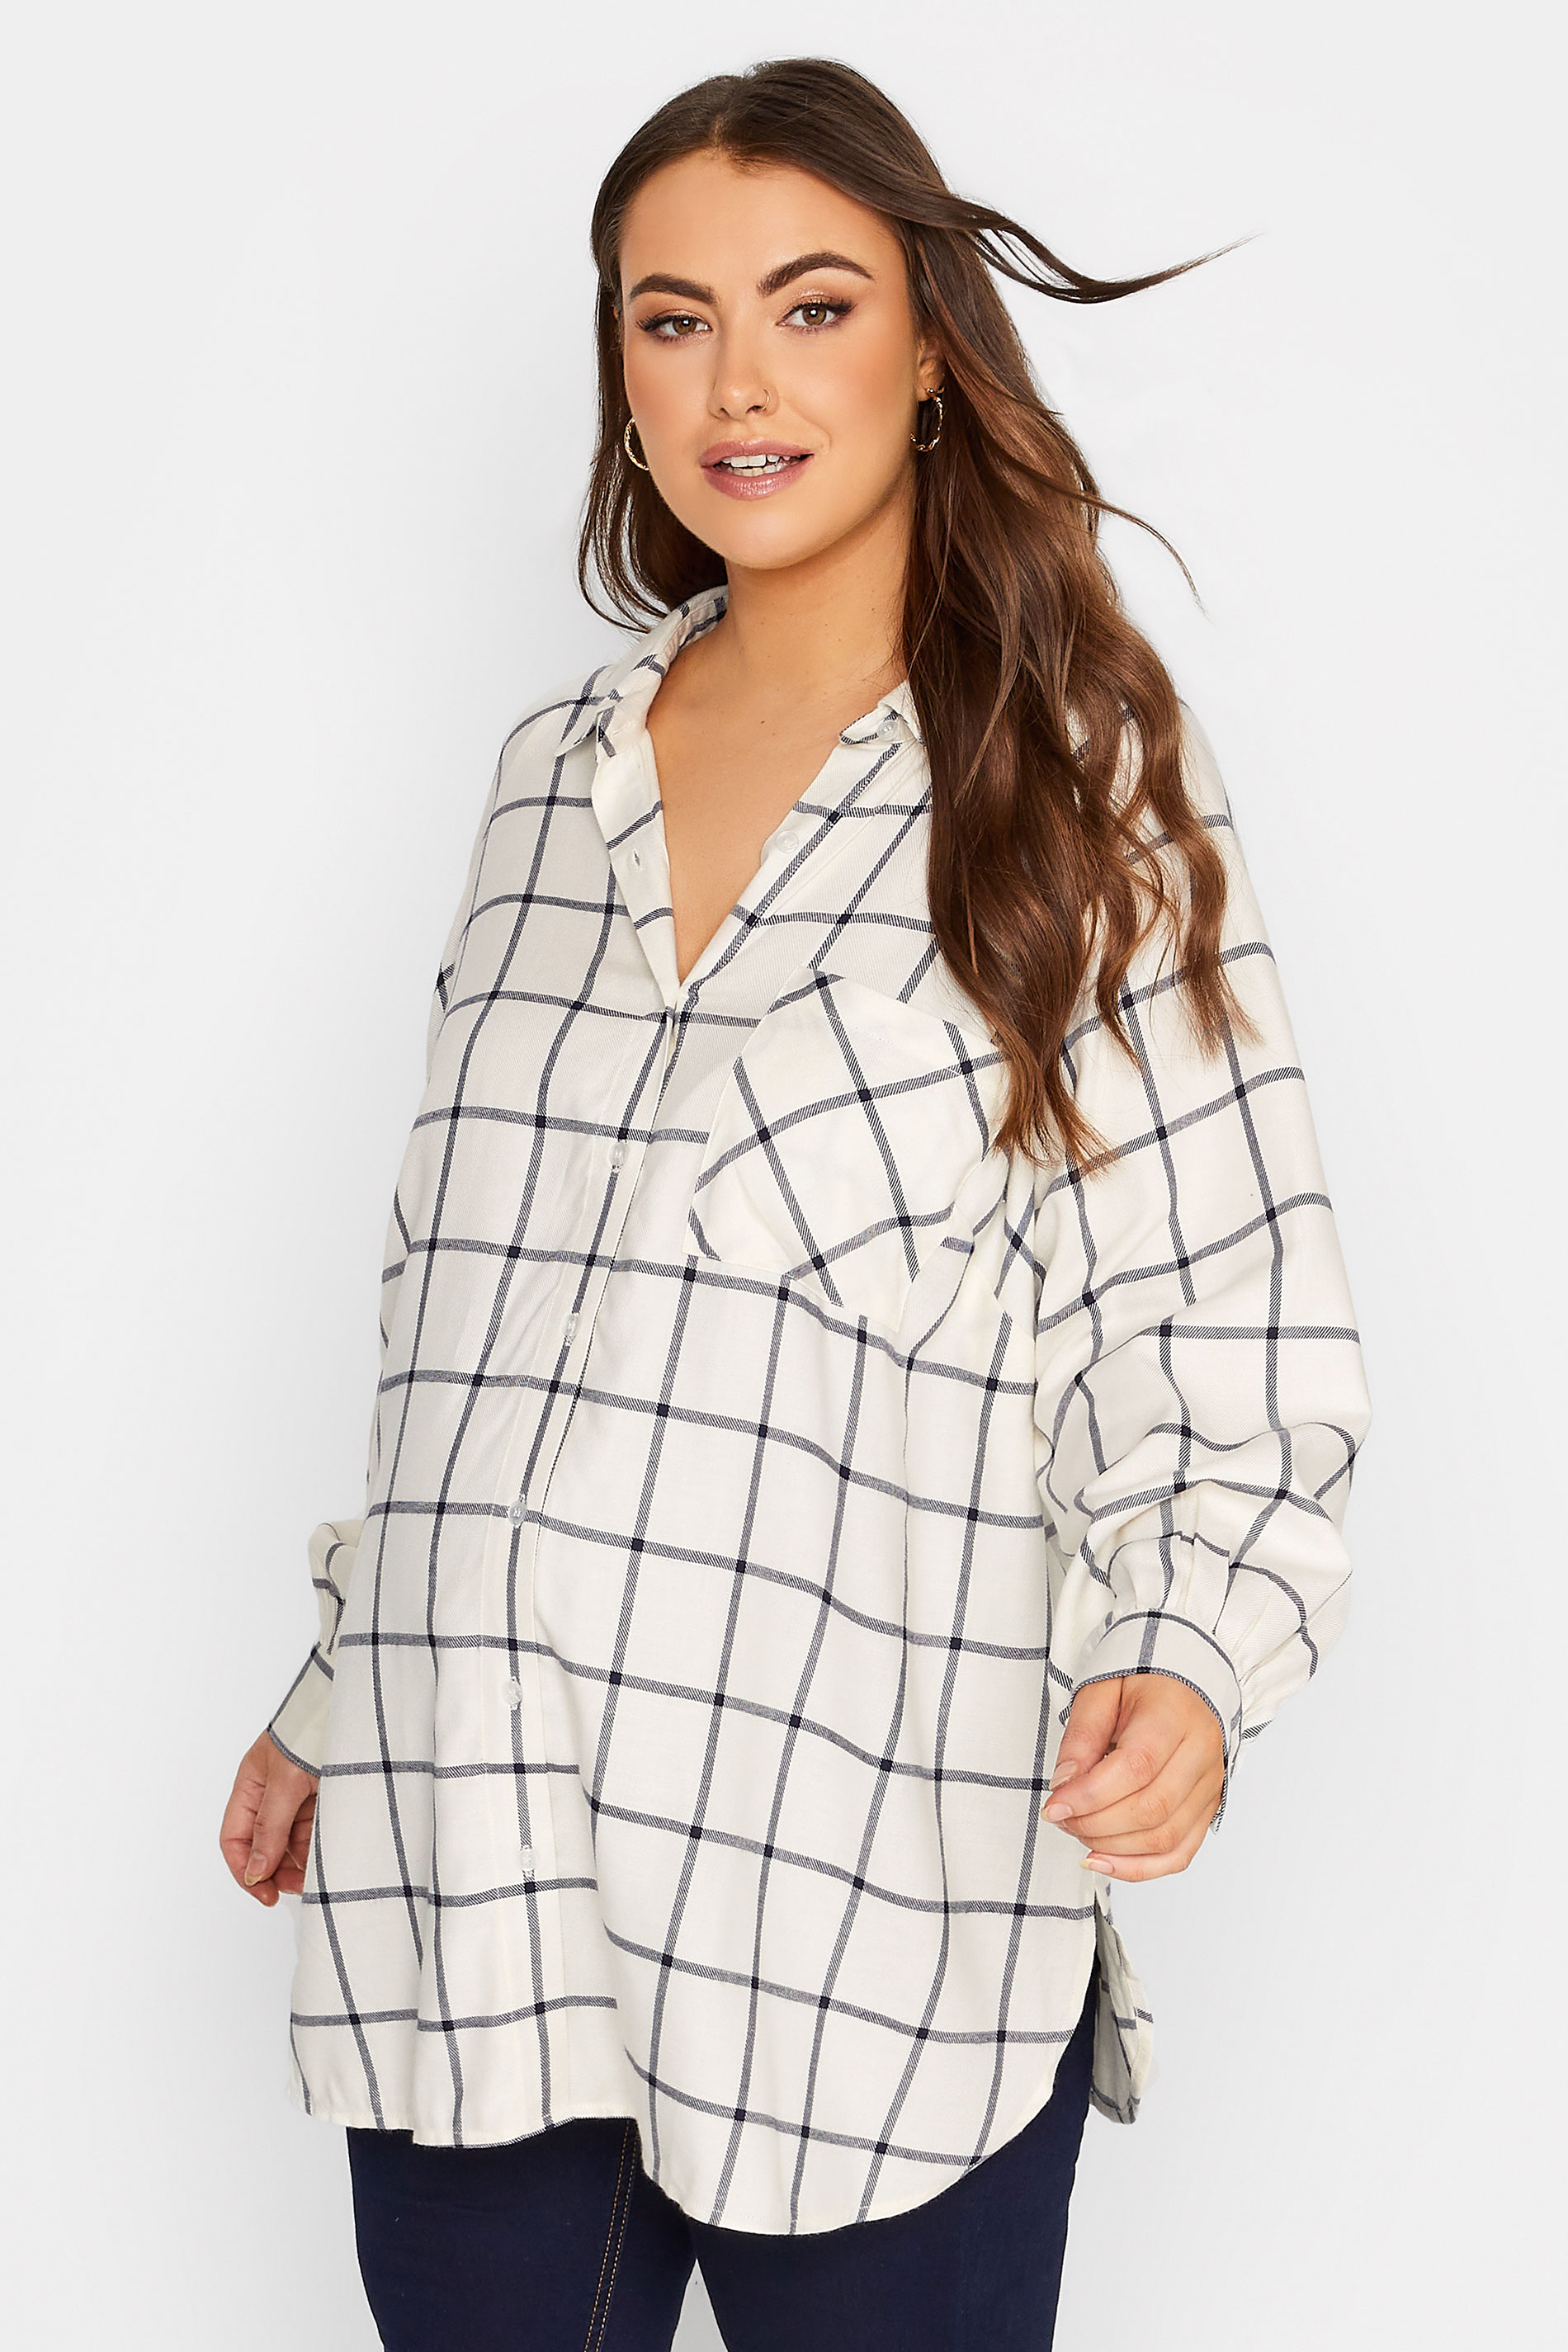 BUMP IT UP MATERNITY Curve White & Black Check Long Sleeve Shirt | Yours Clothing 1